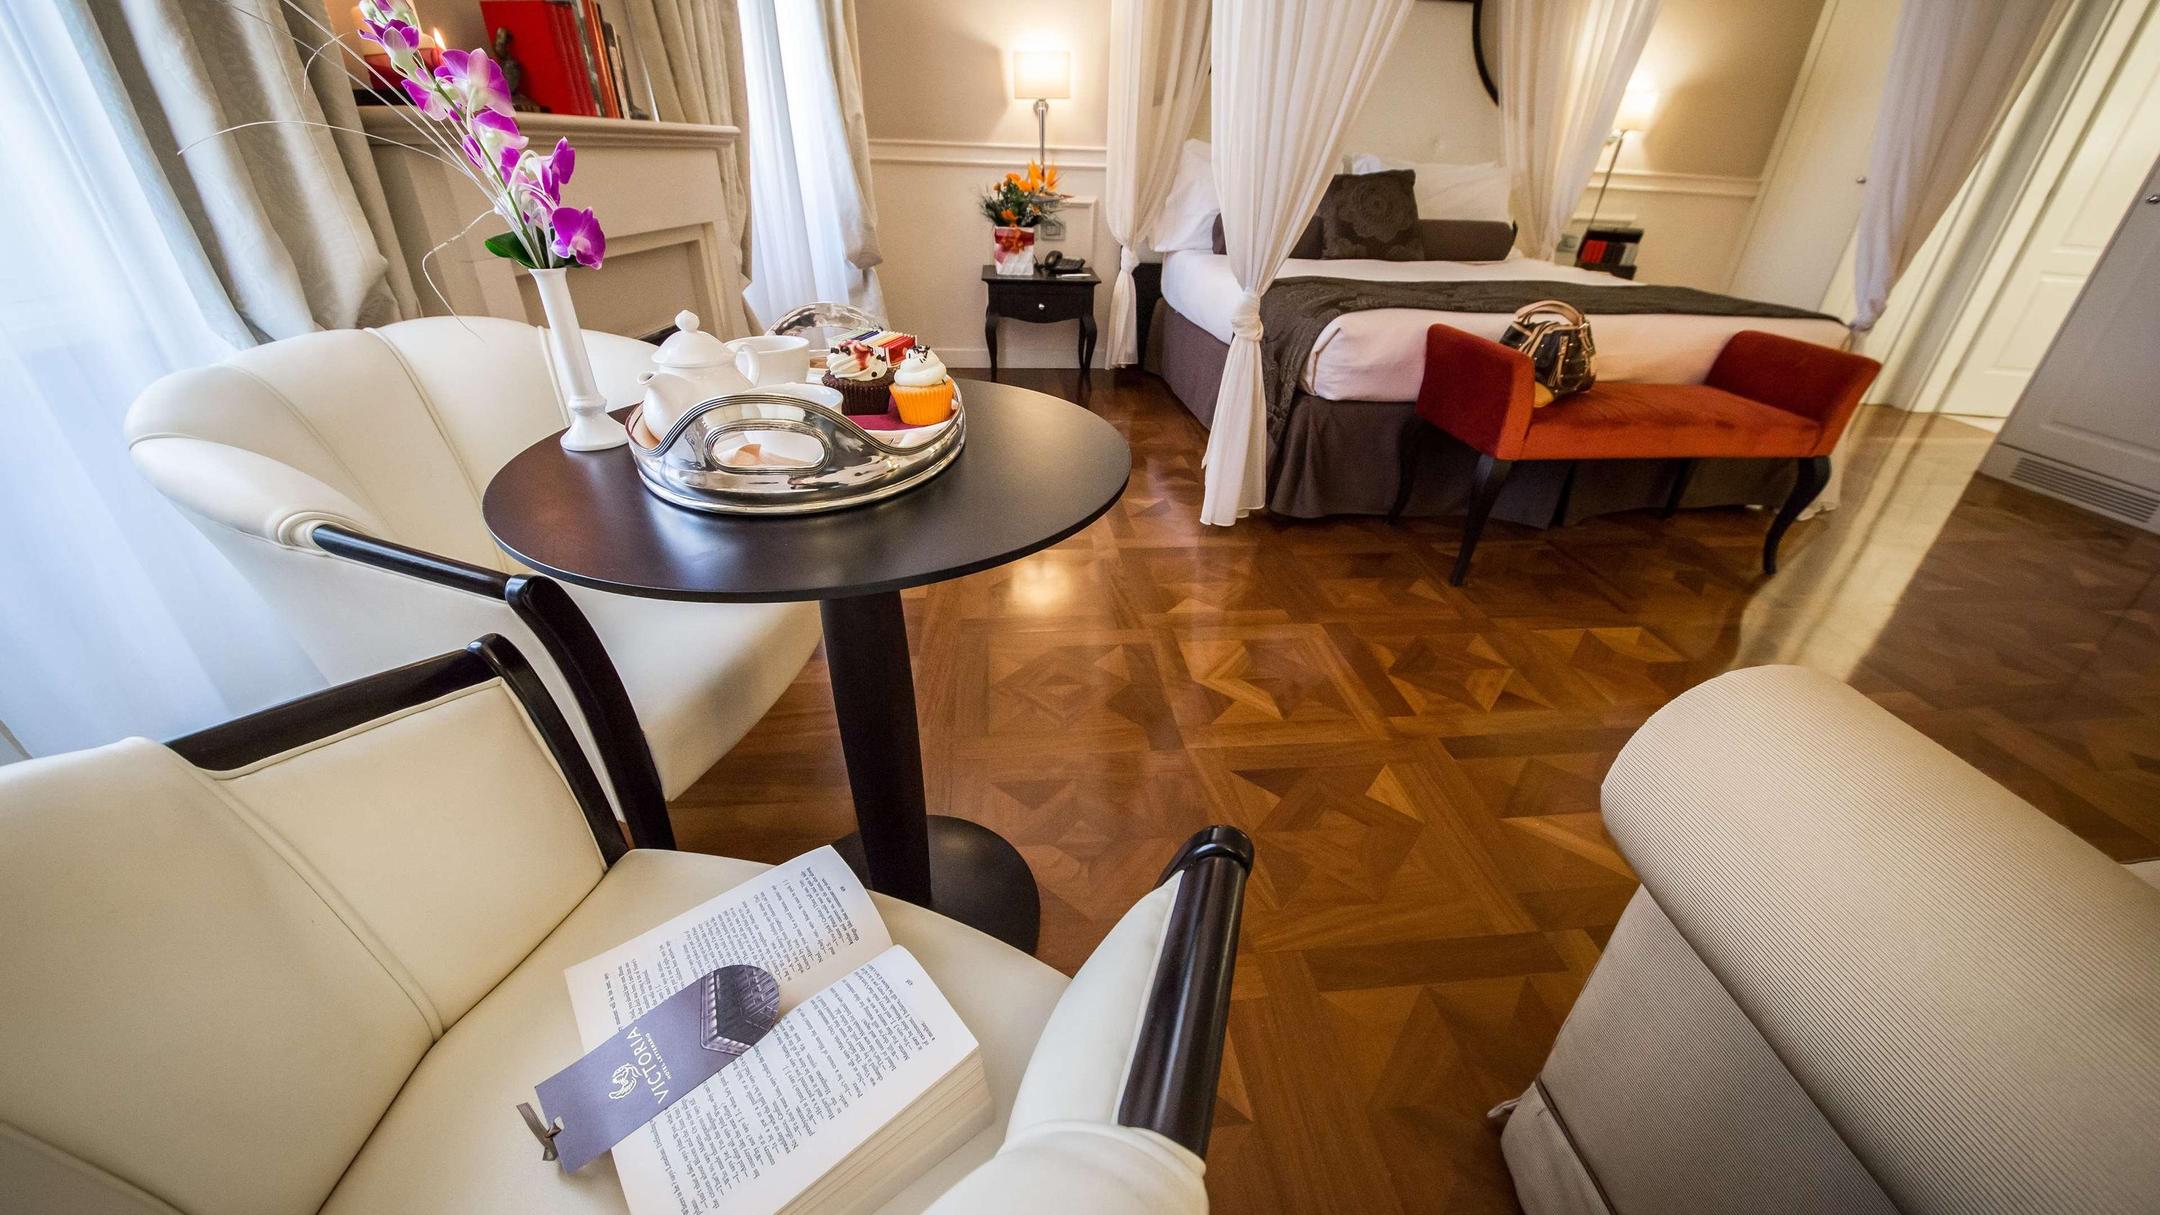 Victoria Hotel Letterario in Trieste, Italy from $102: Deals, Reviews ...